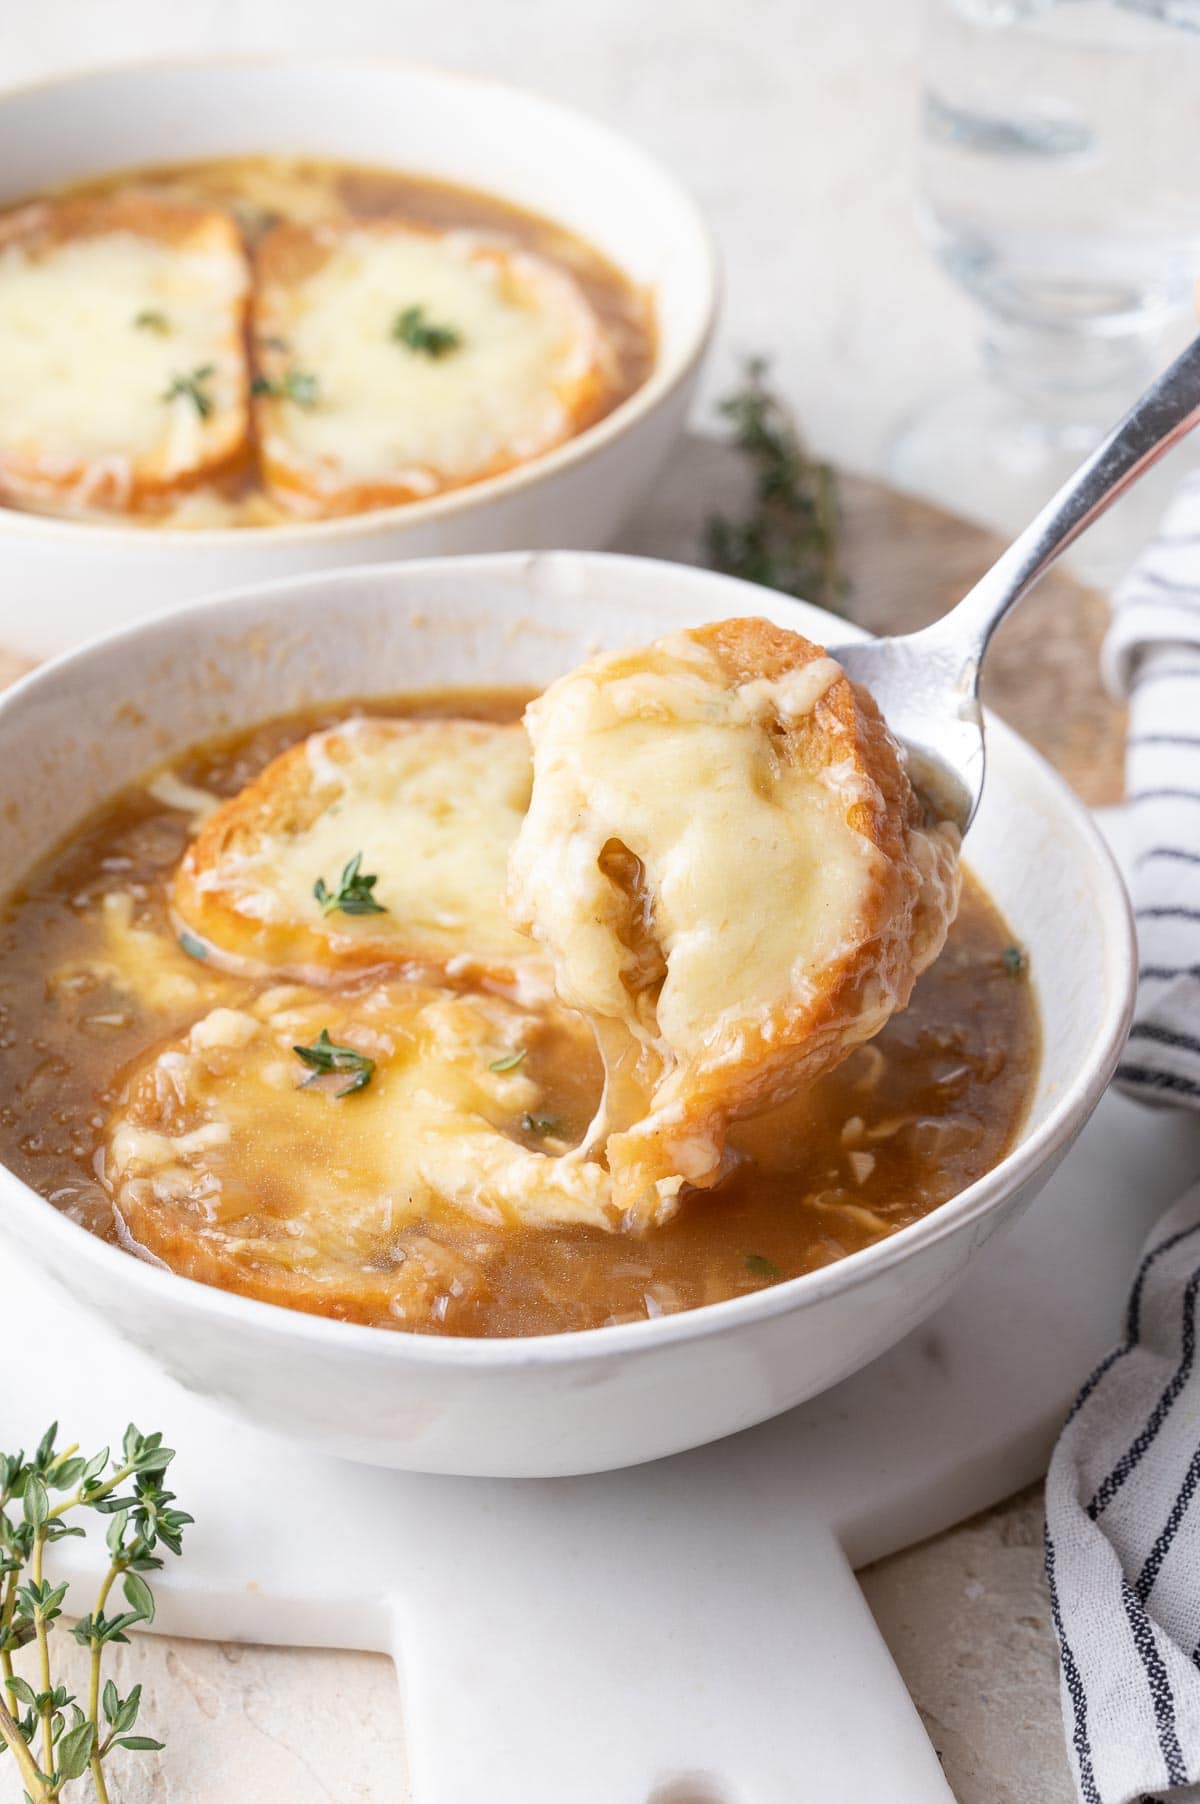 A piece of cheesy baguette is being picked up with a spoon from the French onion soup.